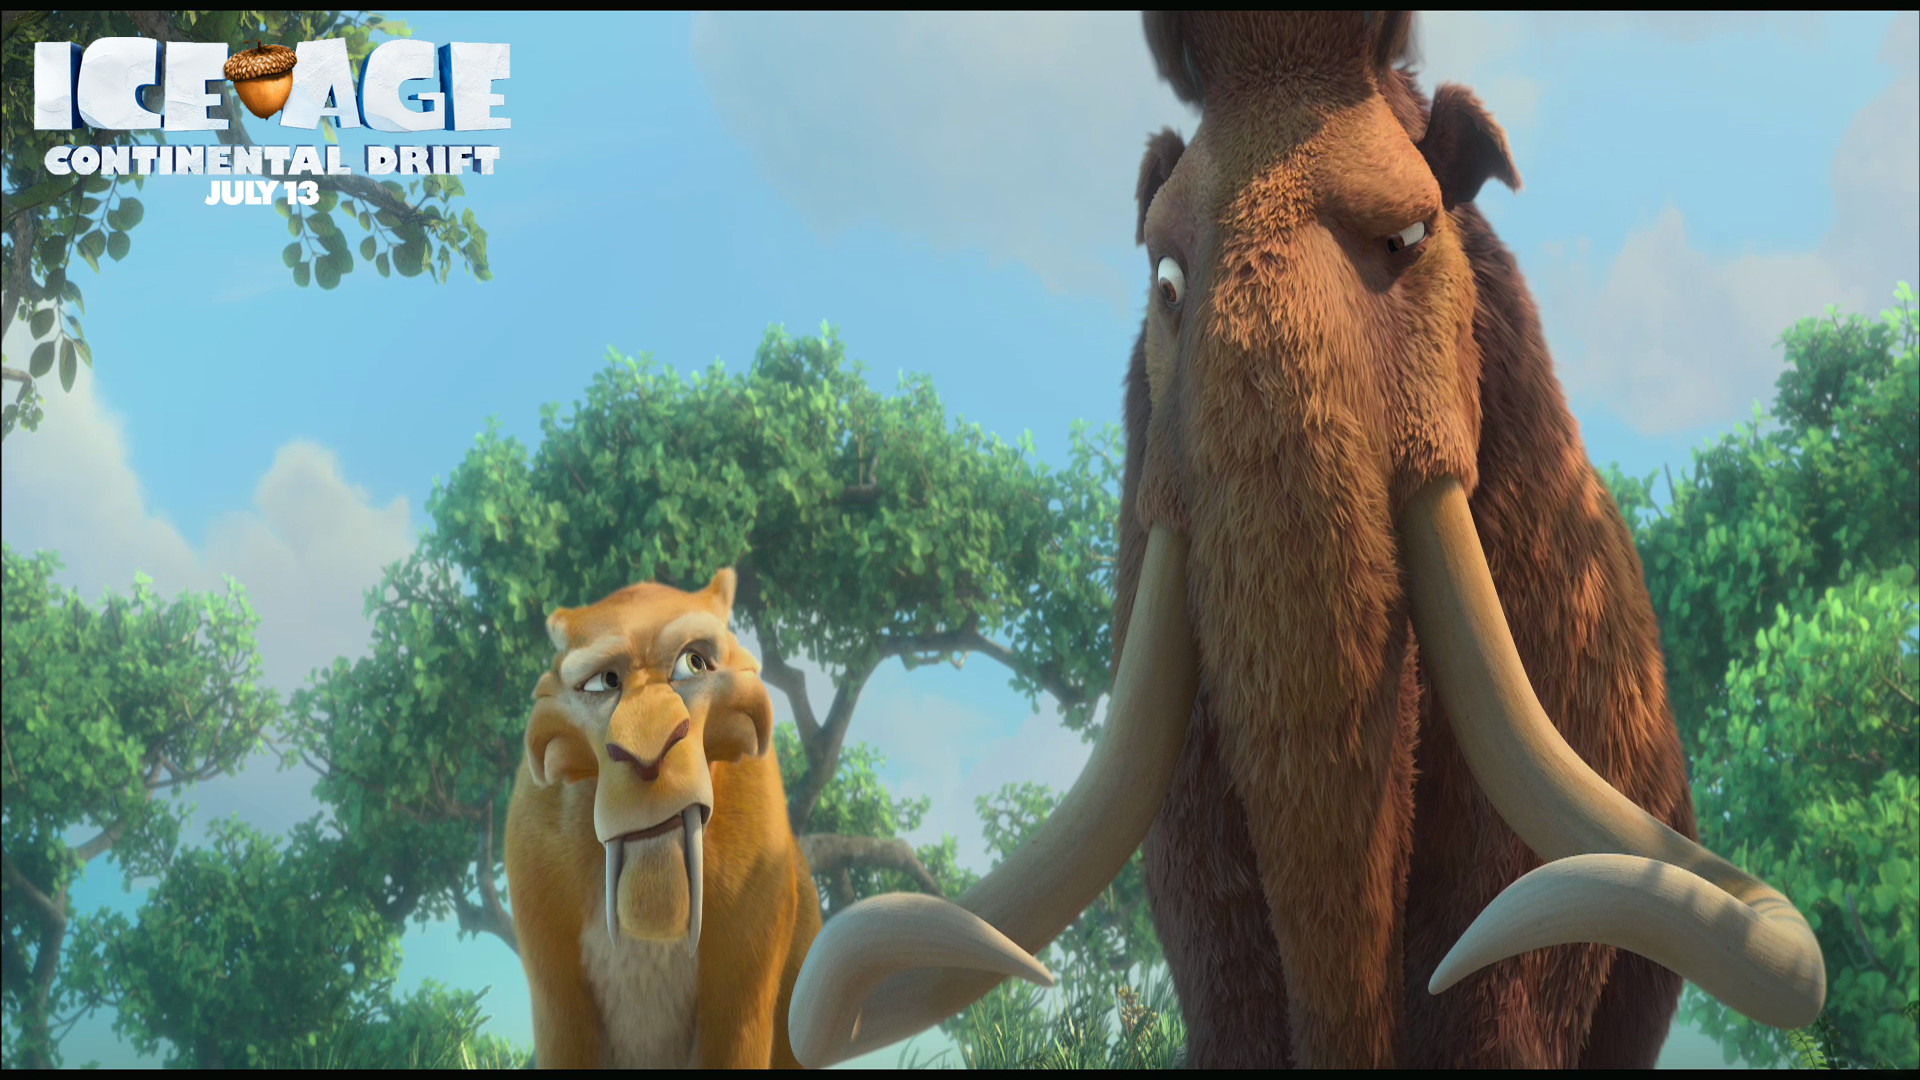 Ice Age Sid Wallpapers 4 Ice Age Sid Wallpapers Pinterest Ice age sid and Ice age